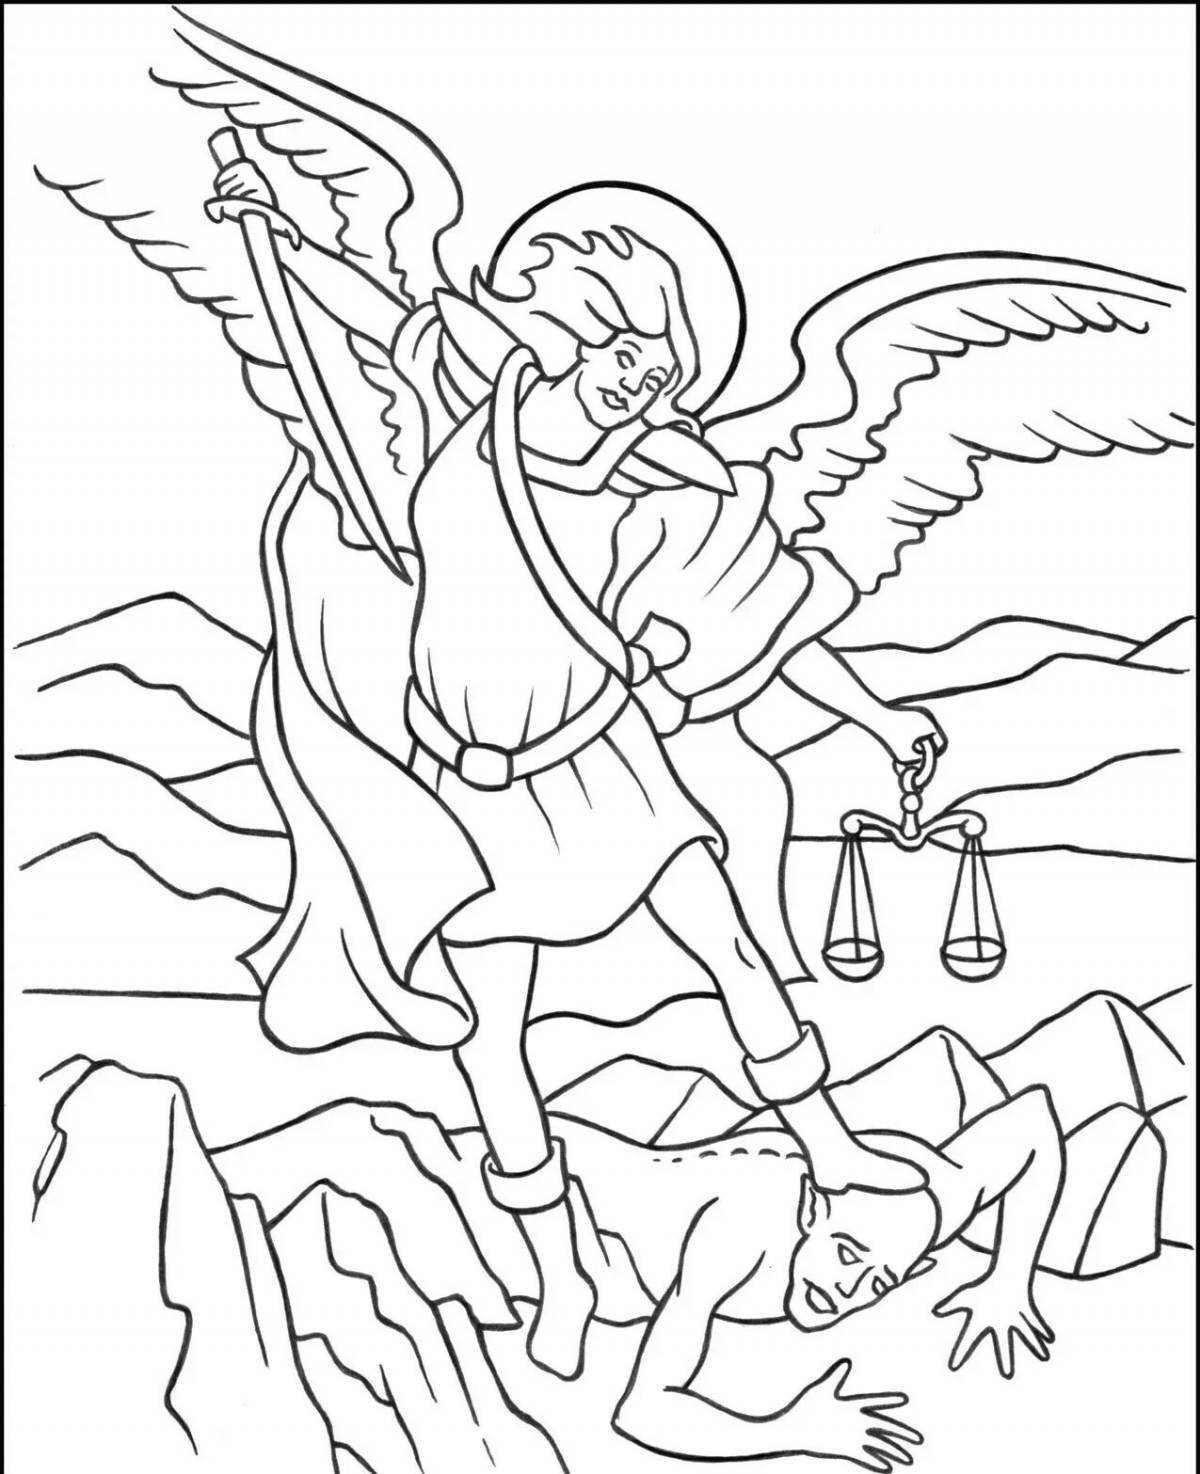 Glowing angel coloring by numbers